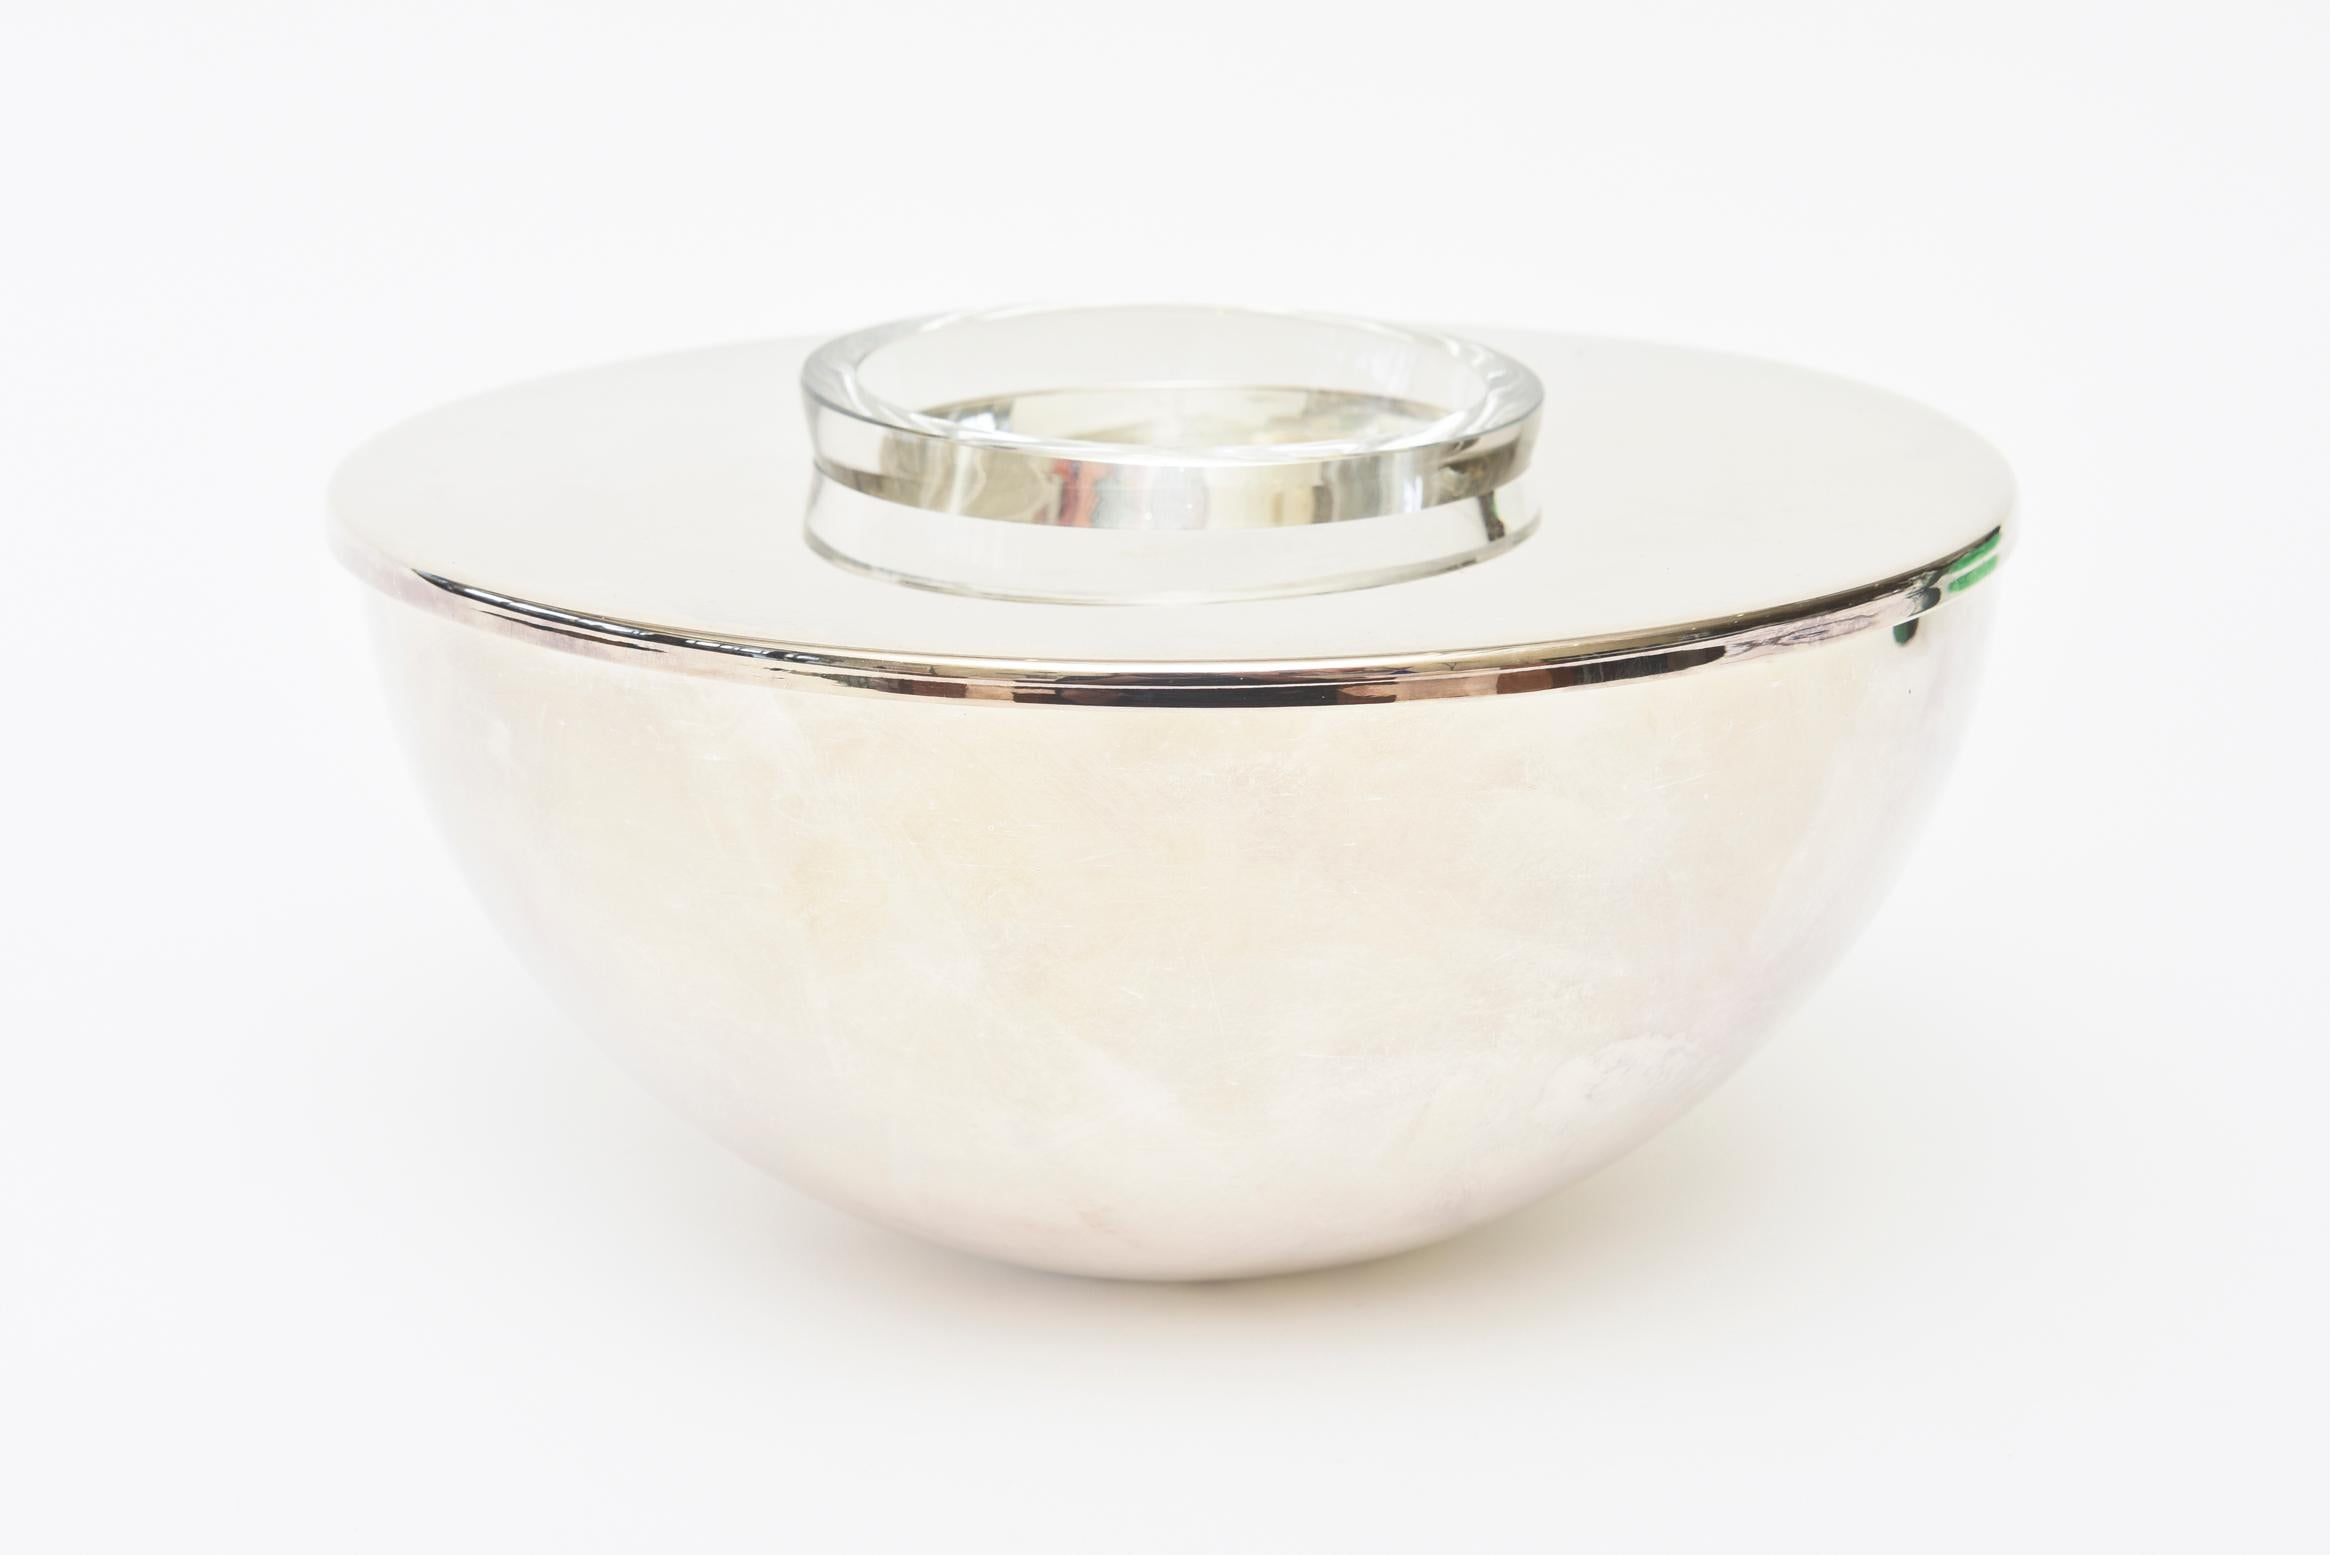 This chic and modernist 1980s silver plate caviar serving bowl and or barware is hallmarked Calvin Klein- Swid Powell. The bowl was manufactured in Hong Kong and the glass insert in Turkey. The glass bowl insert is 3.5